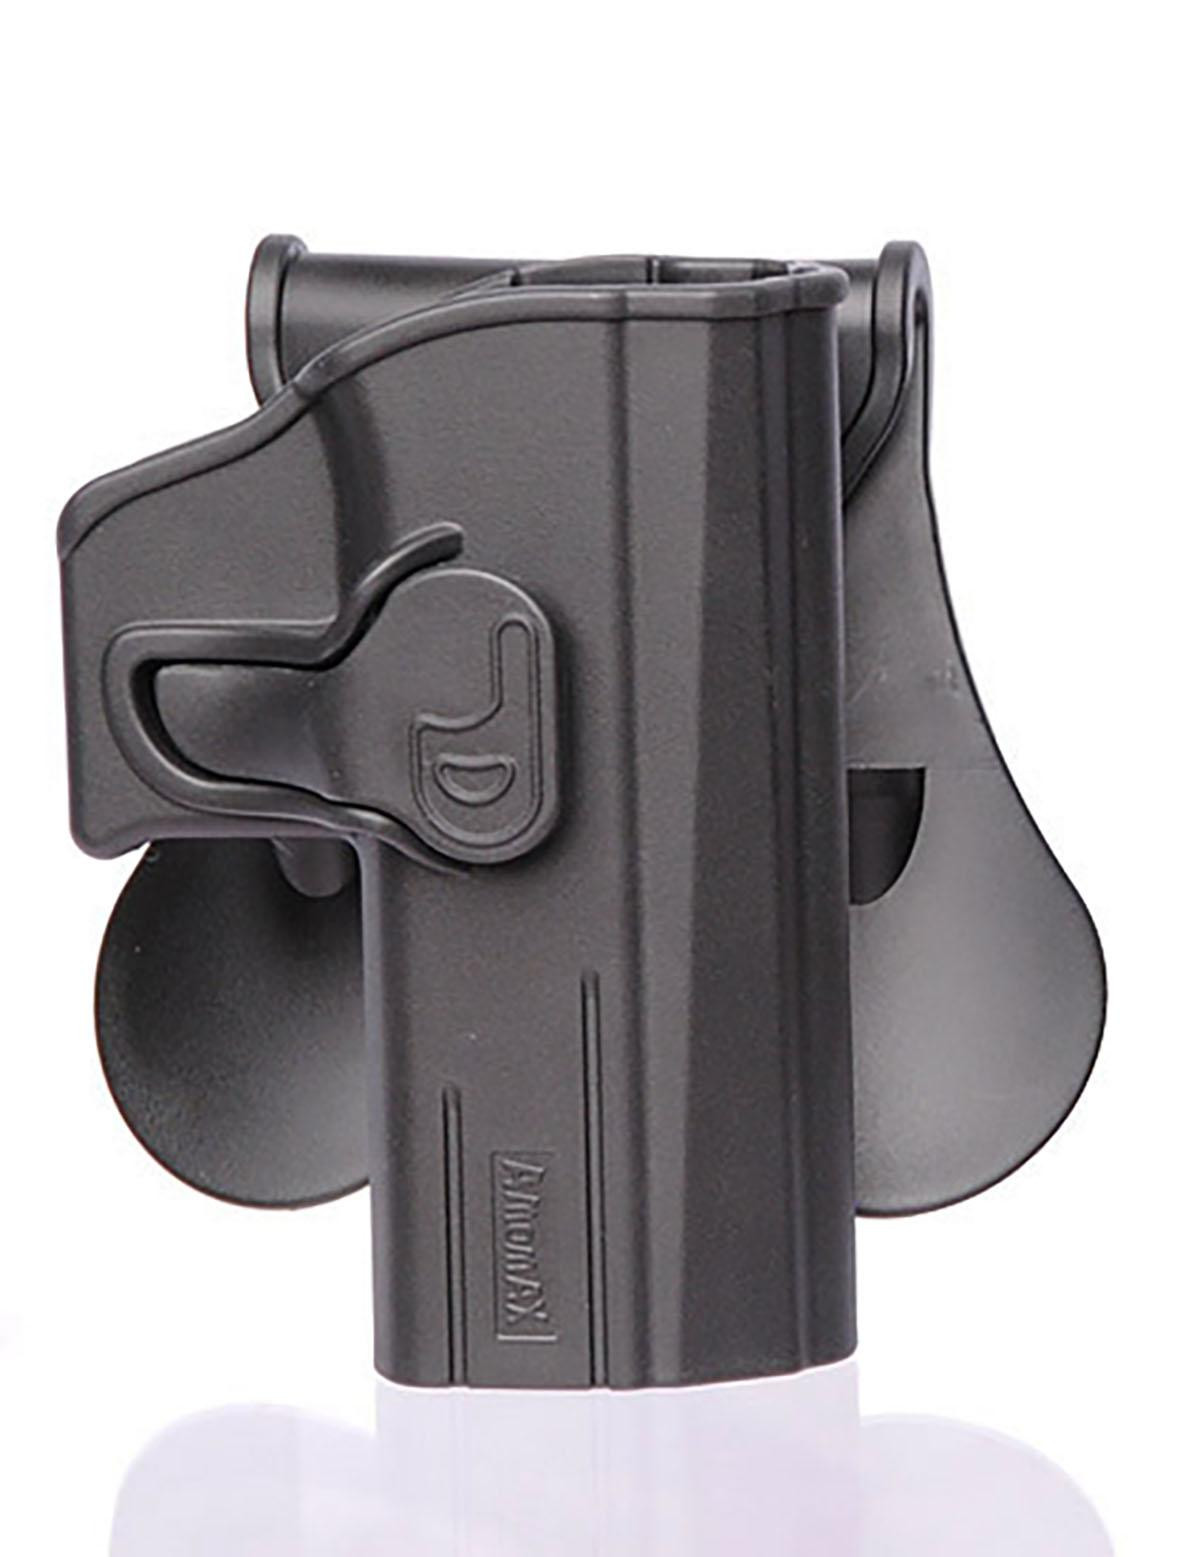 Holster cuisse droitier OPS universel – Action Airsoft